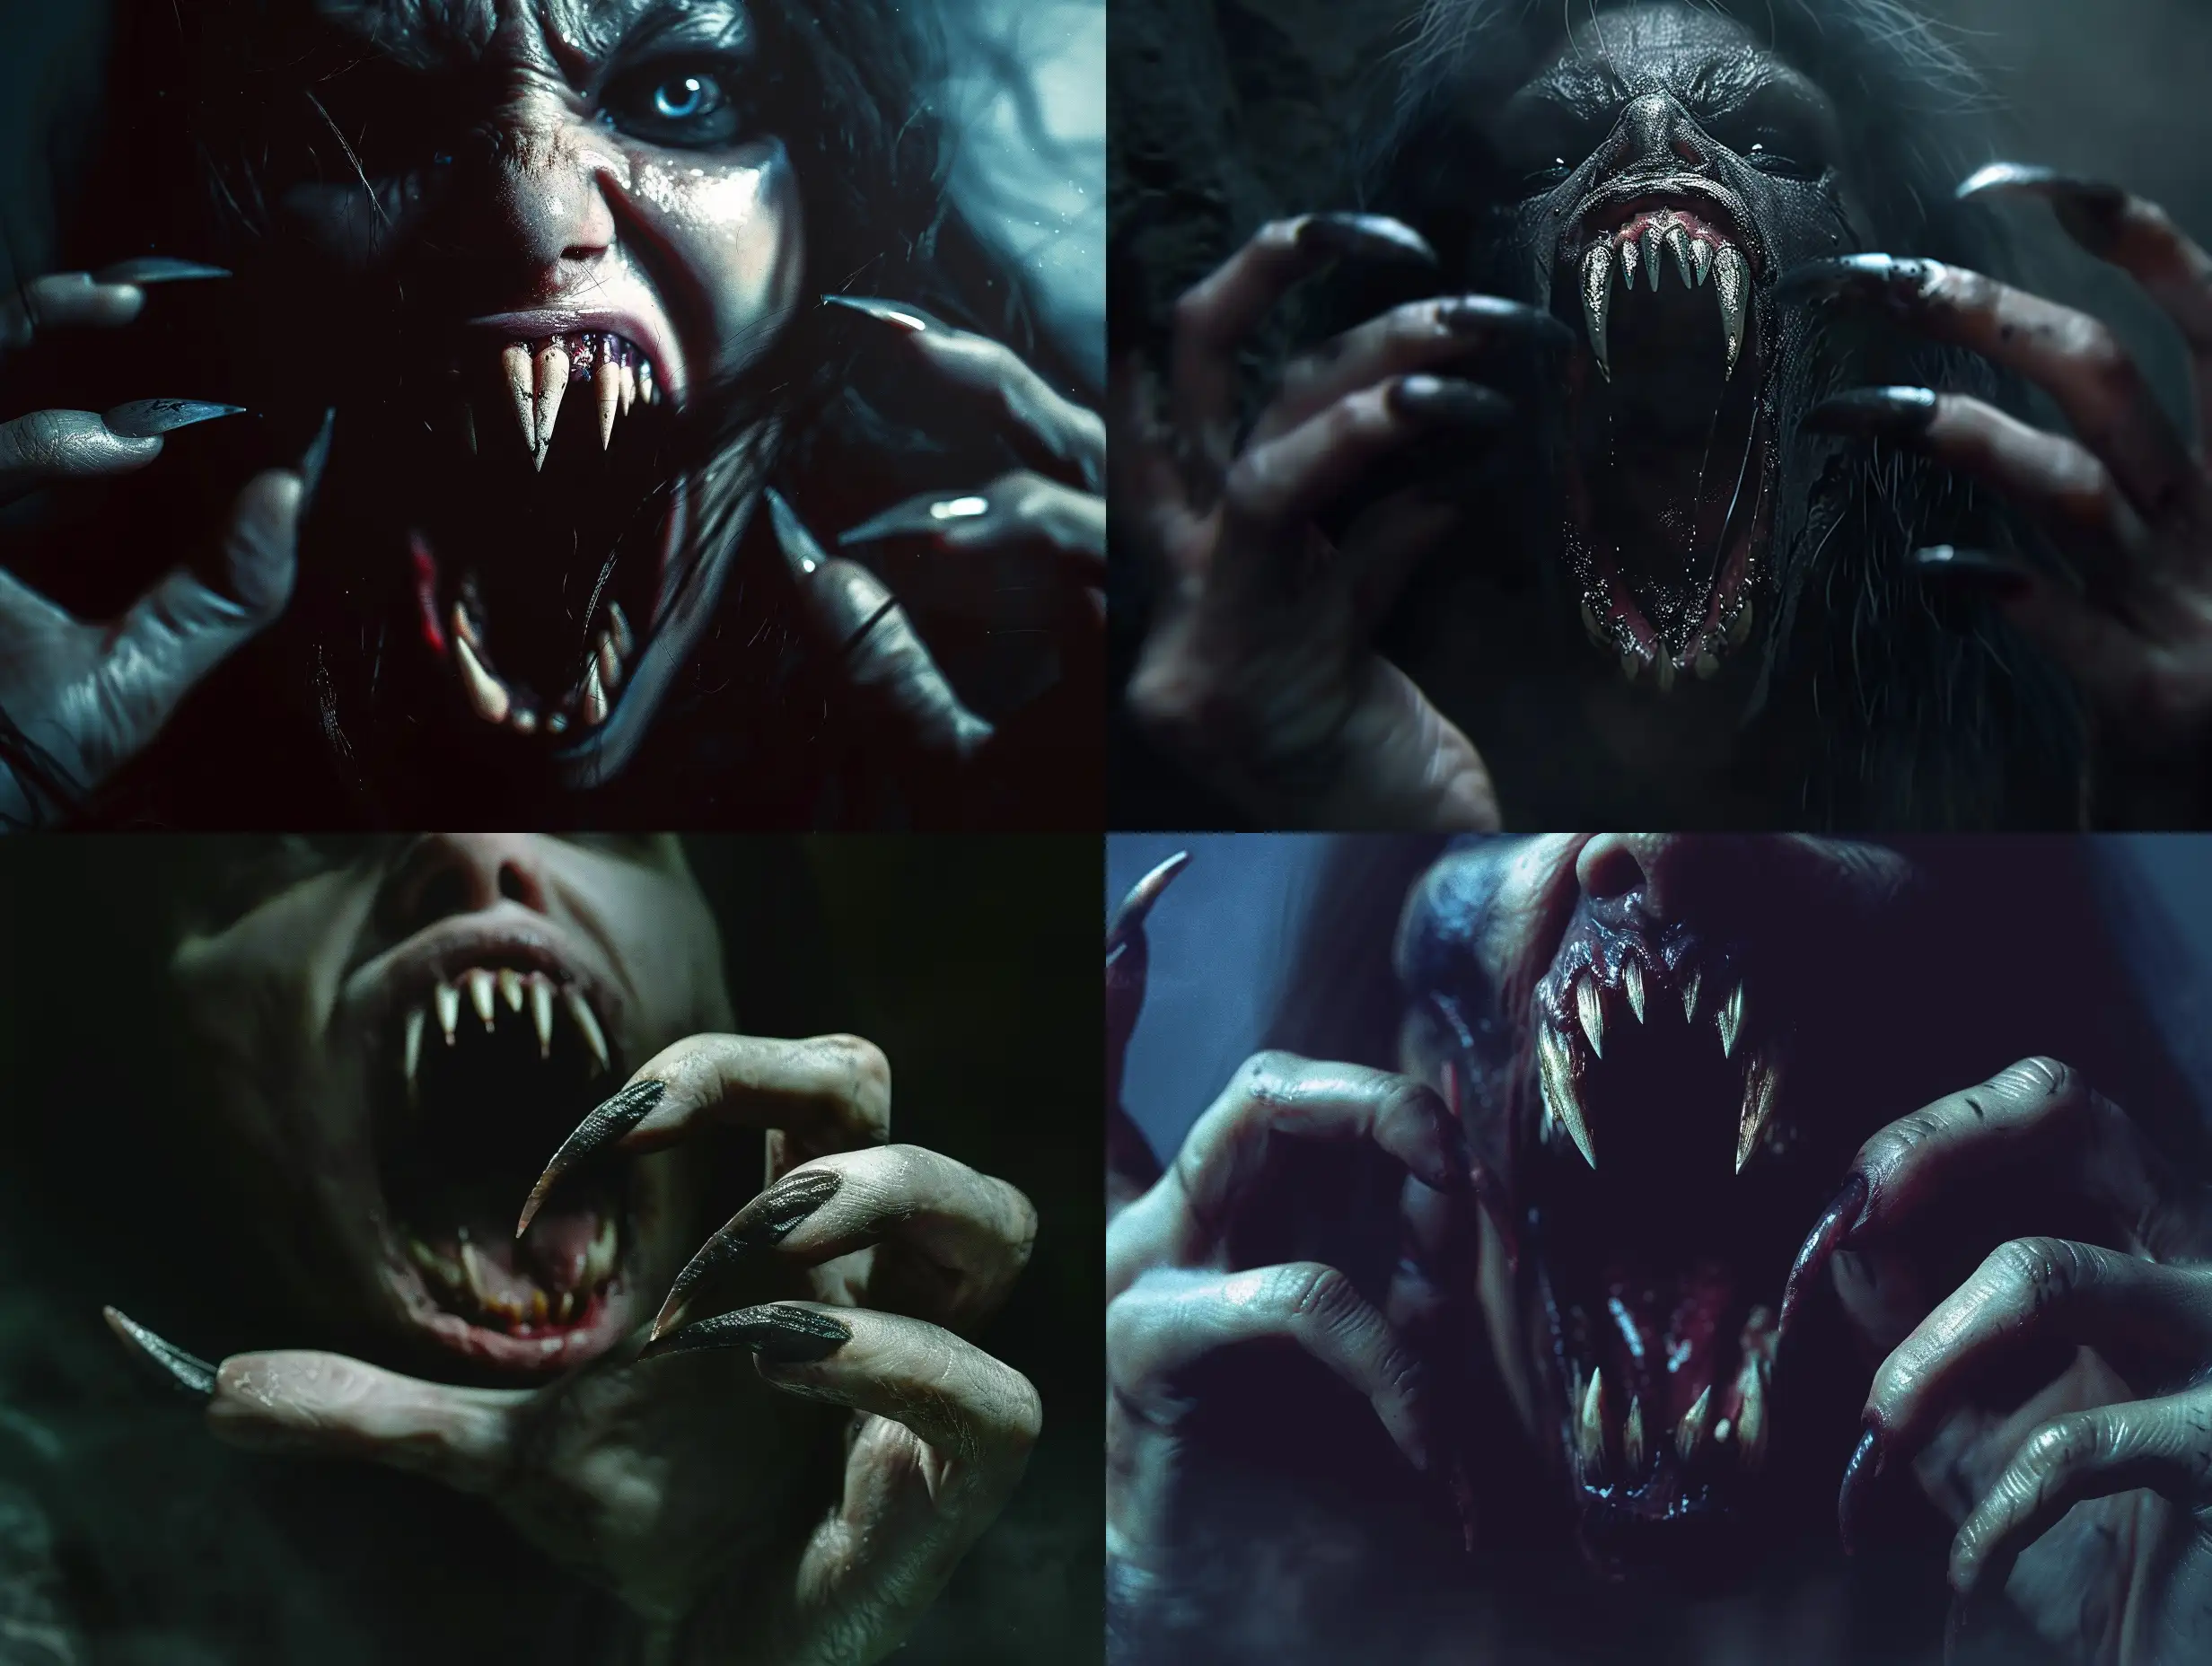 A photorealistic nightmare scene of a wild vampire woman emerging from the darkness, her menacing mouth open to reveal terrifying fangs. Her long, pointed fingernails resemble the claws of a predator, adding to the eerie and haunting atmosphere. The vampire's appearance is grotesque, with every detail meticulously textured and detailed, from the anatomical accuracy of her hands with five fingers to the hyper-realistic rendering of her undead features. The cinematic quality of the scene intensifies the horror, creating a nightmare-inducing image that is both aggressive and intensely creepy. The atmospheric lighting adds to the overall sense of terror, making this an incredibly detailed and realistic portrayal of a monstrous vampire